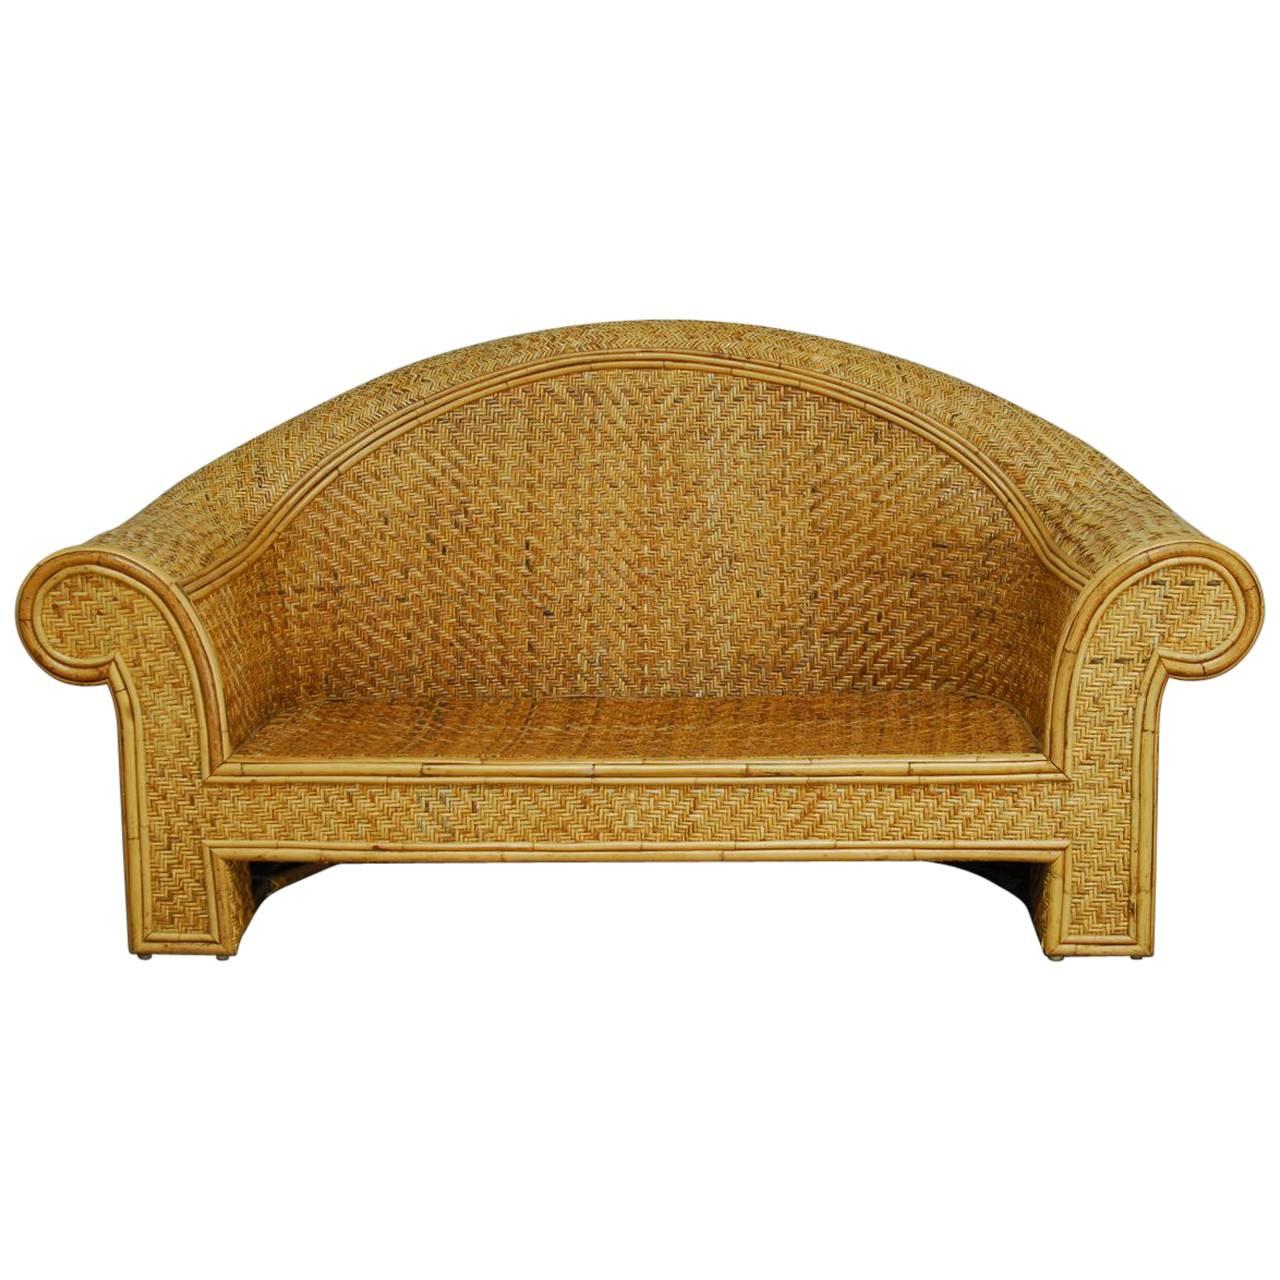 Woven Rattan and Bamboo Settee in the Manner of Ralph Lauren